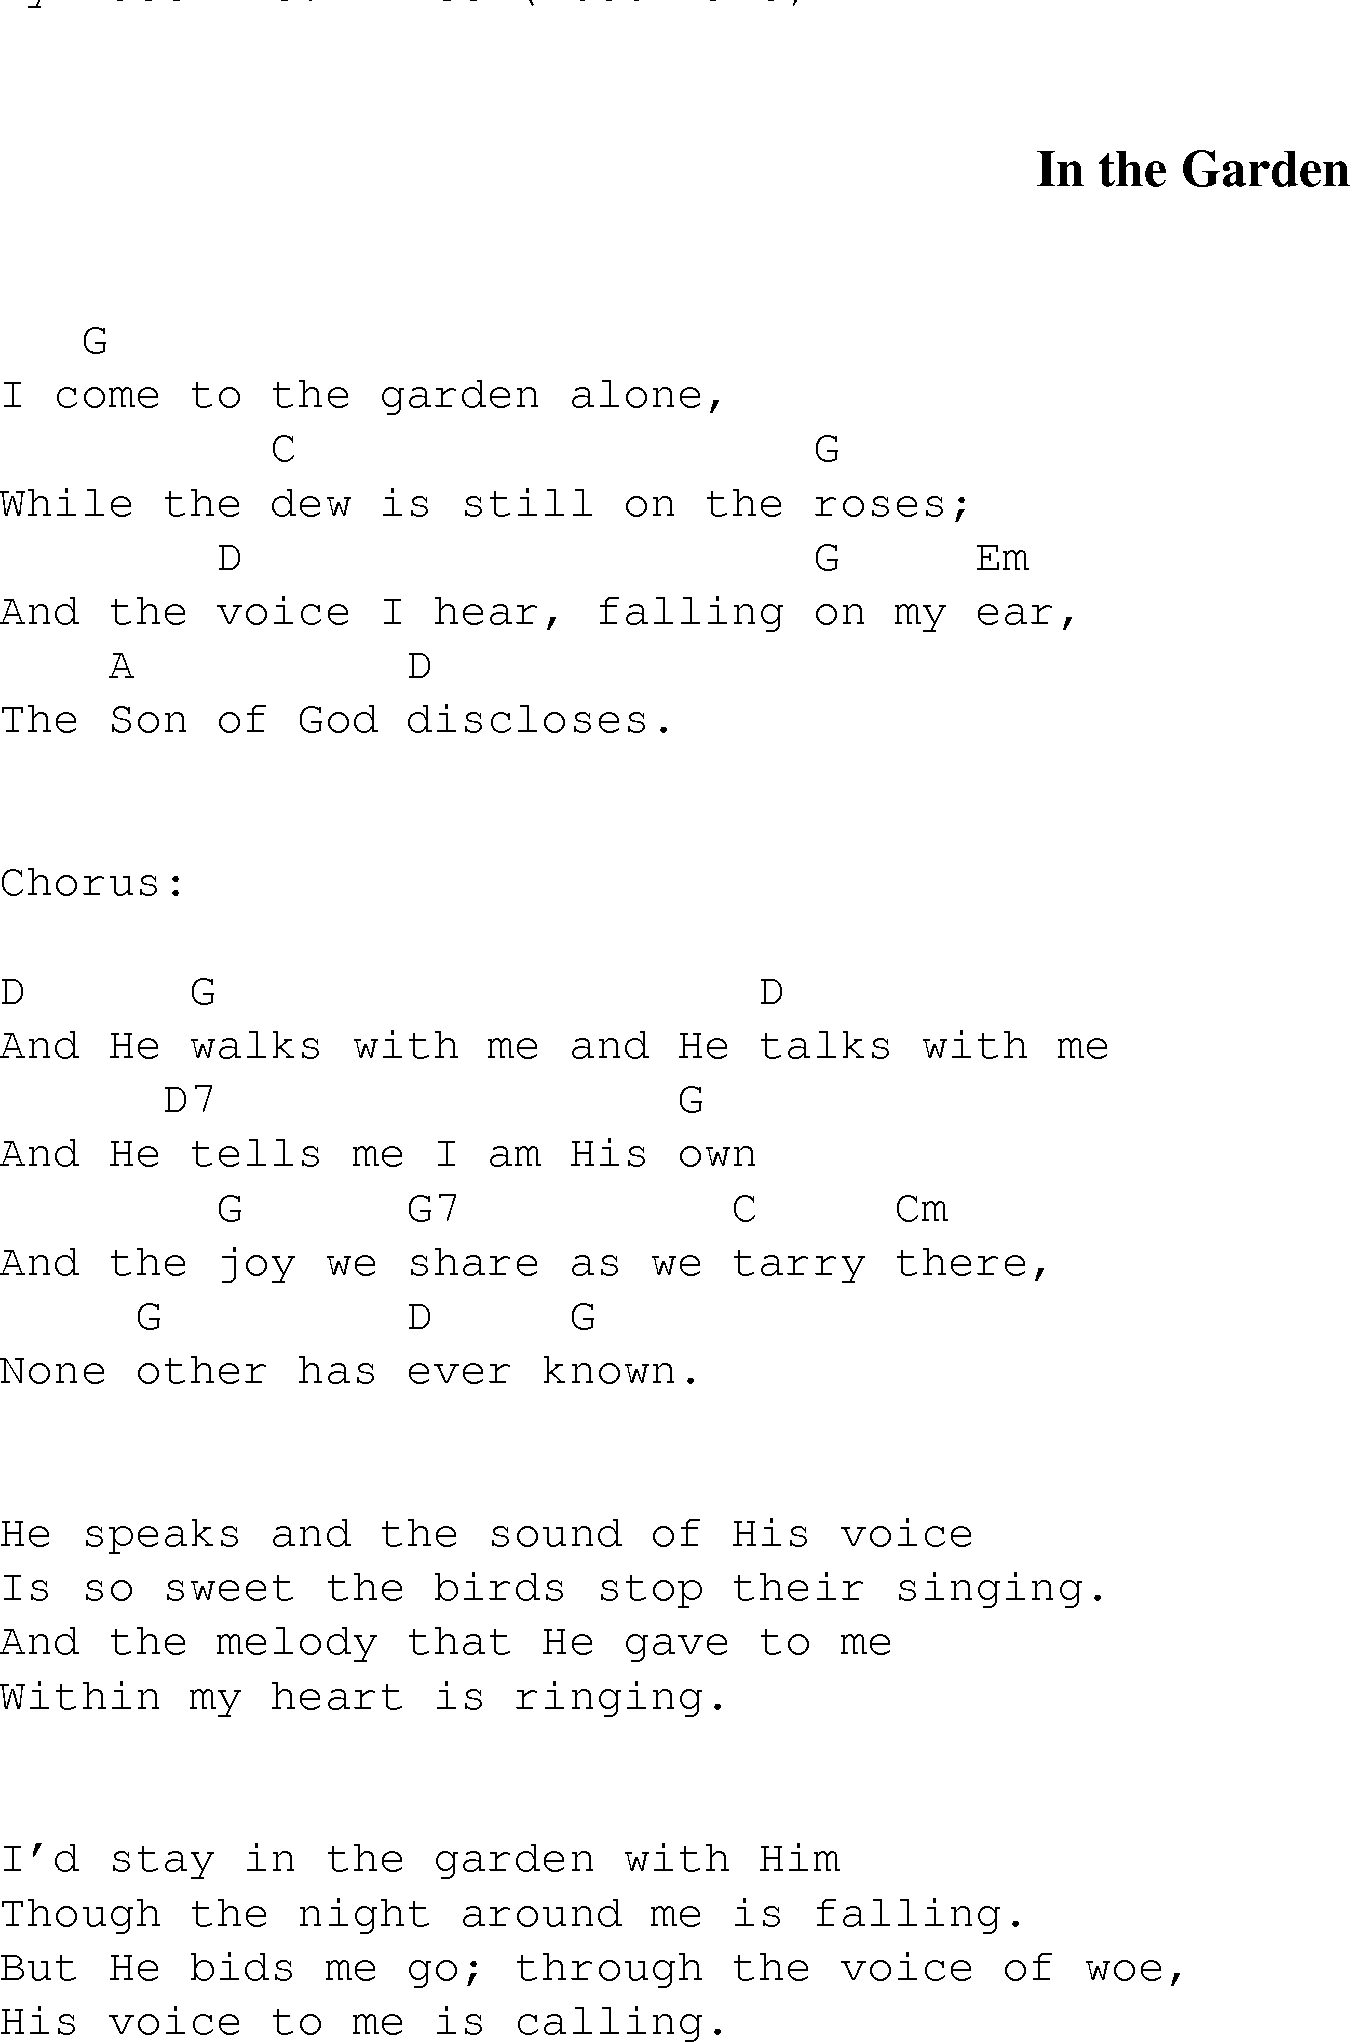 This Is Gospel Piano Chords In The Garden 1 Christian Gospel Song Lyrics And Chords